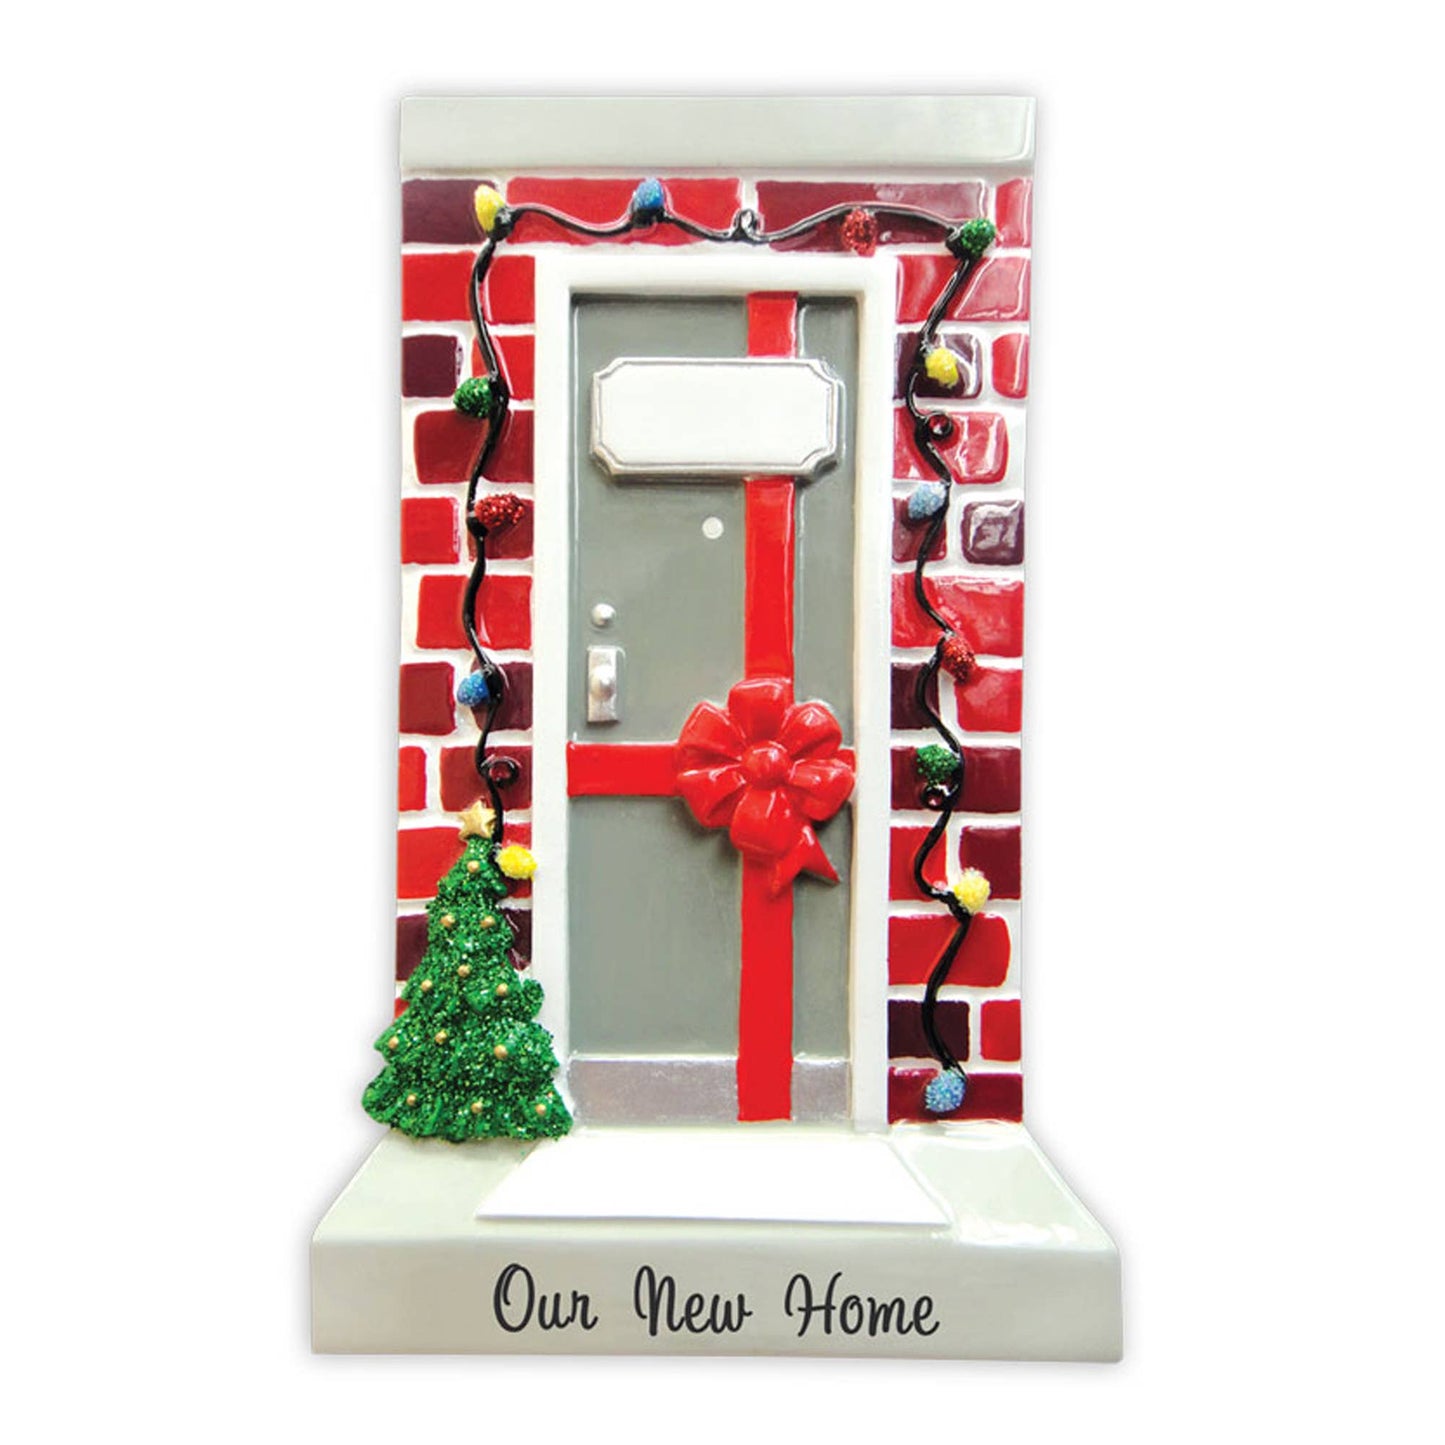 Our New Home Door Personalized Christmas Ornament